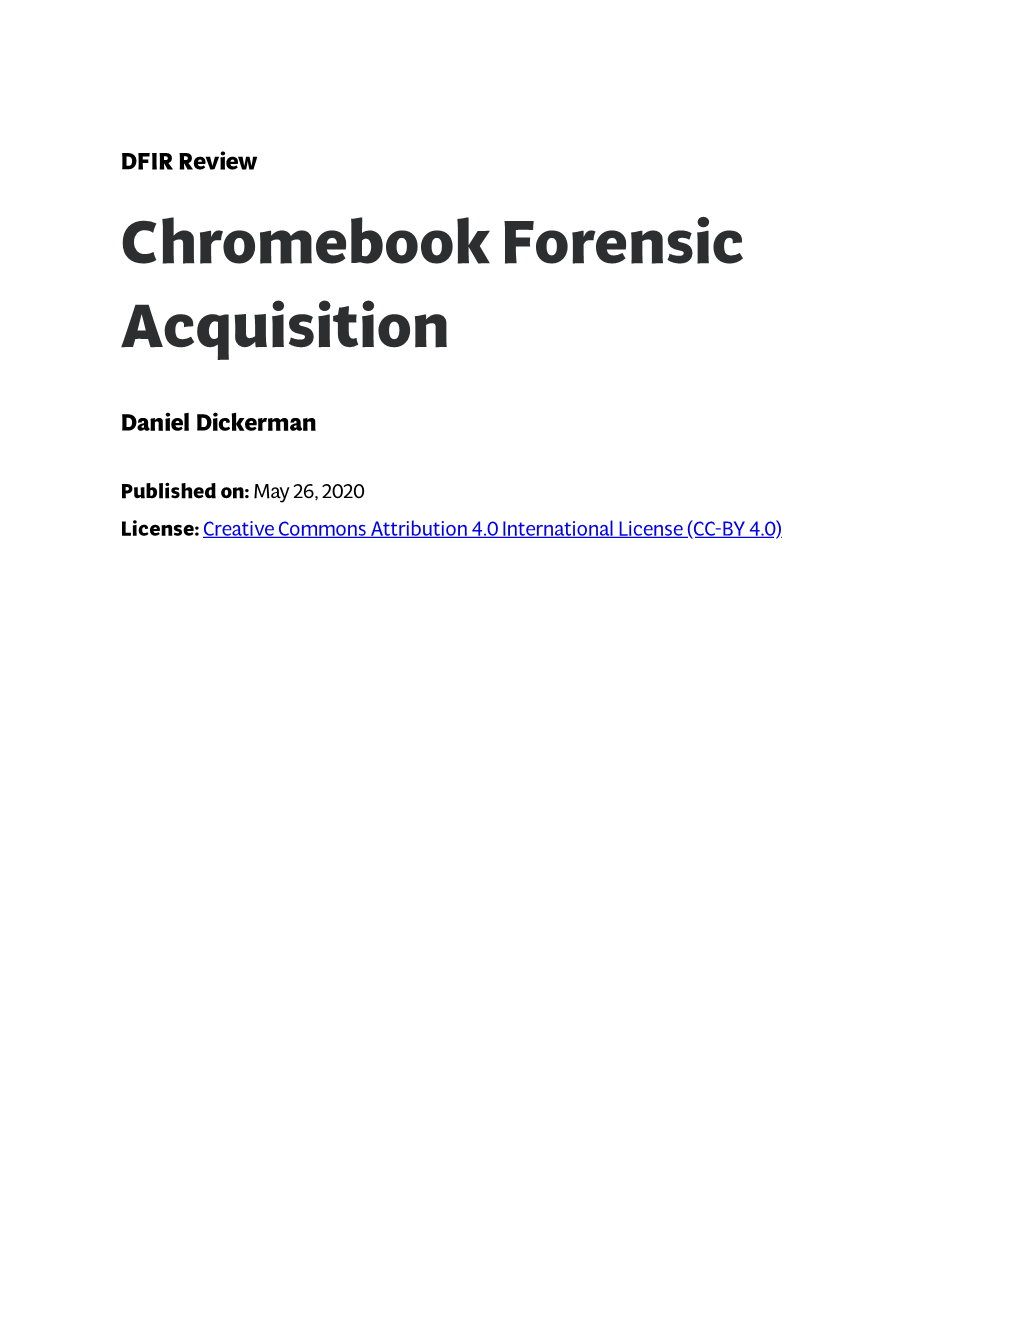 Chromebook Forensic Acquisition